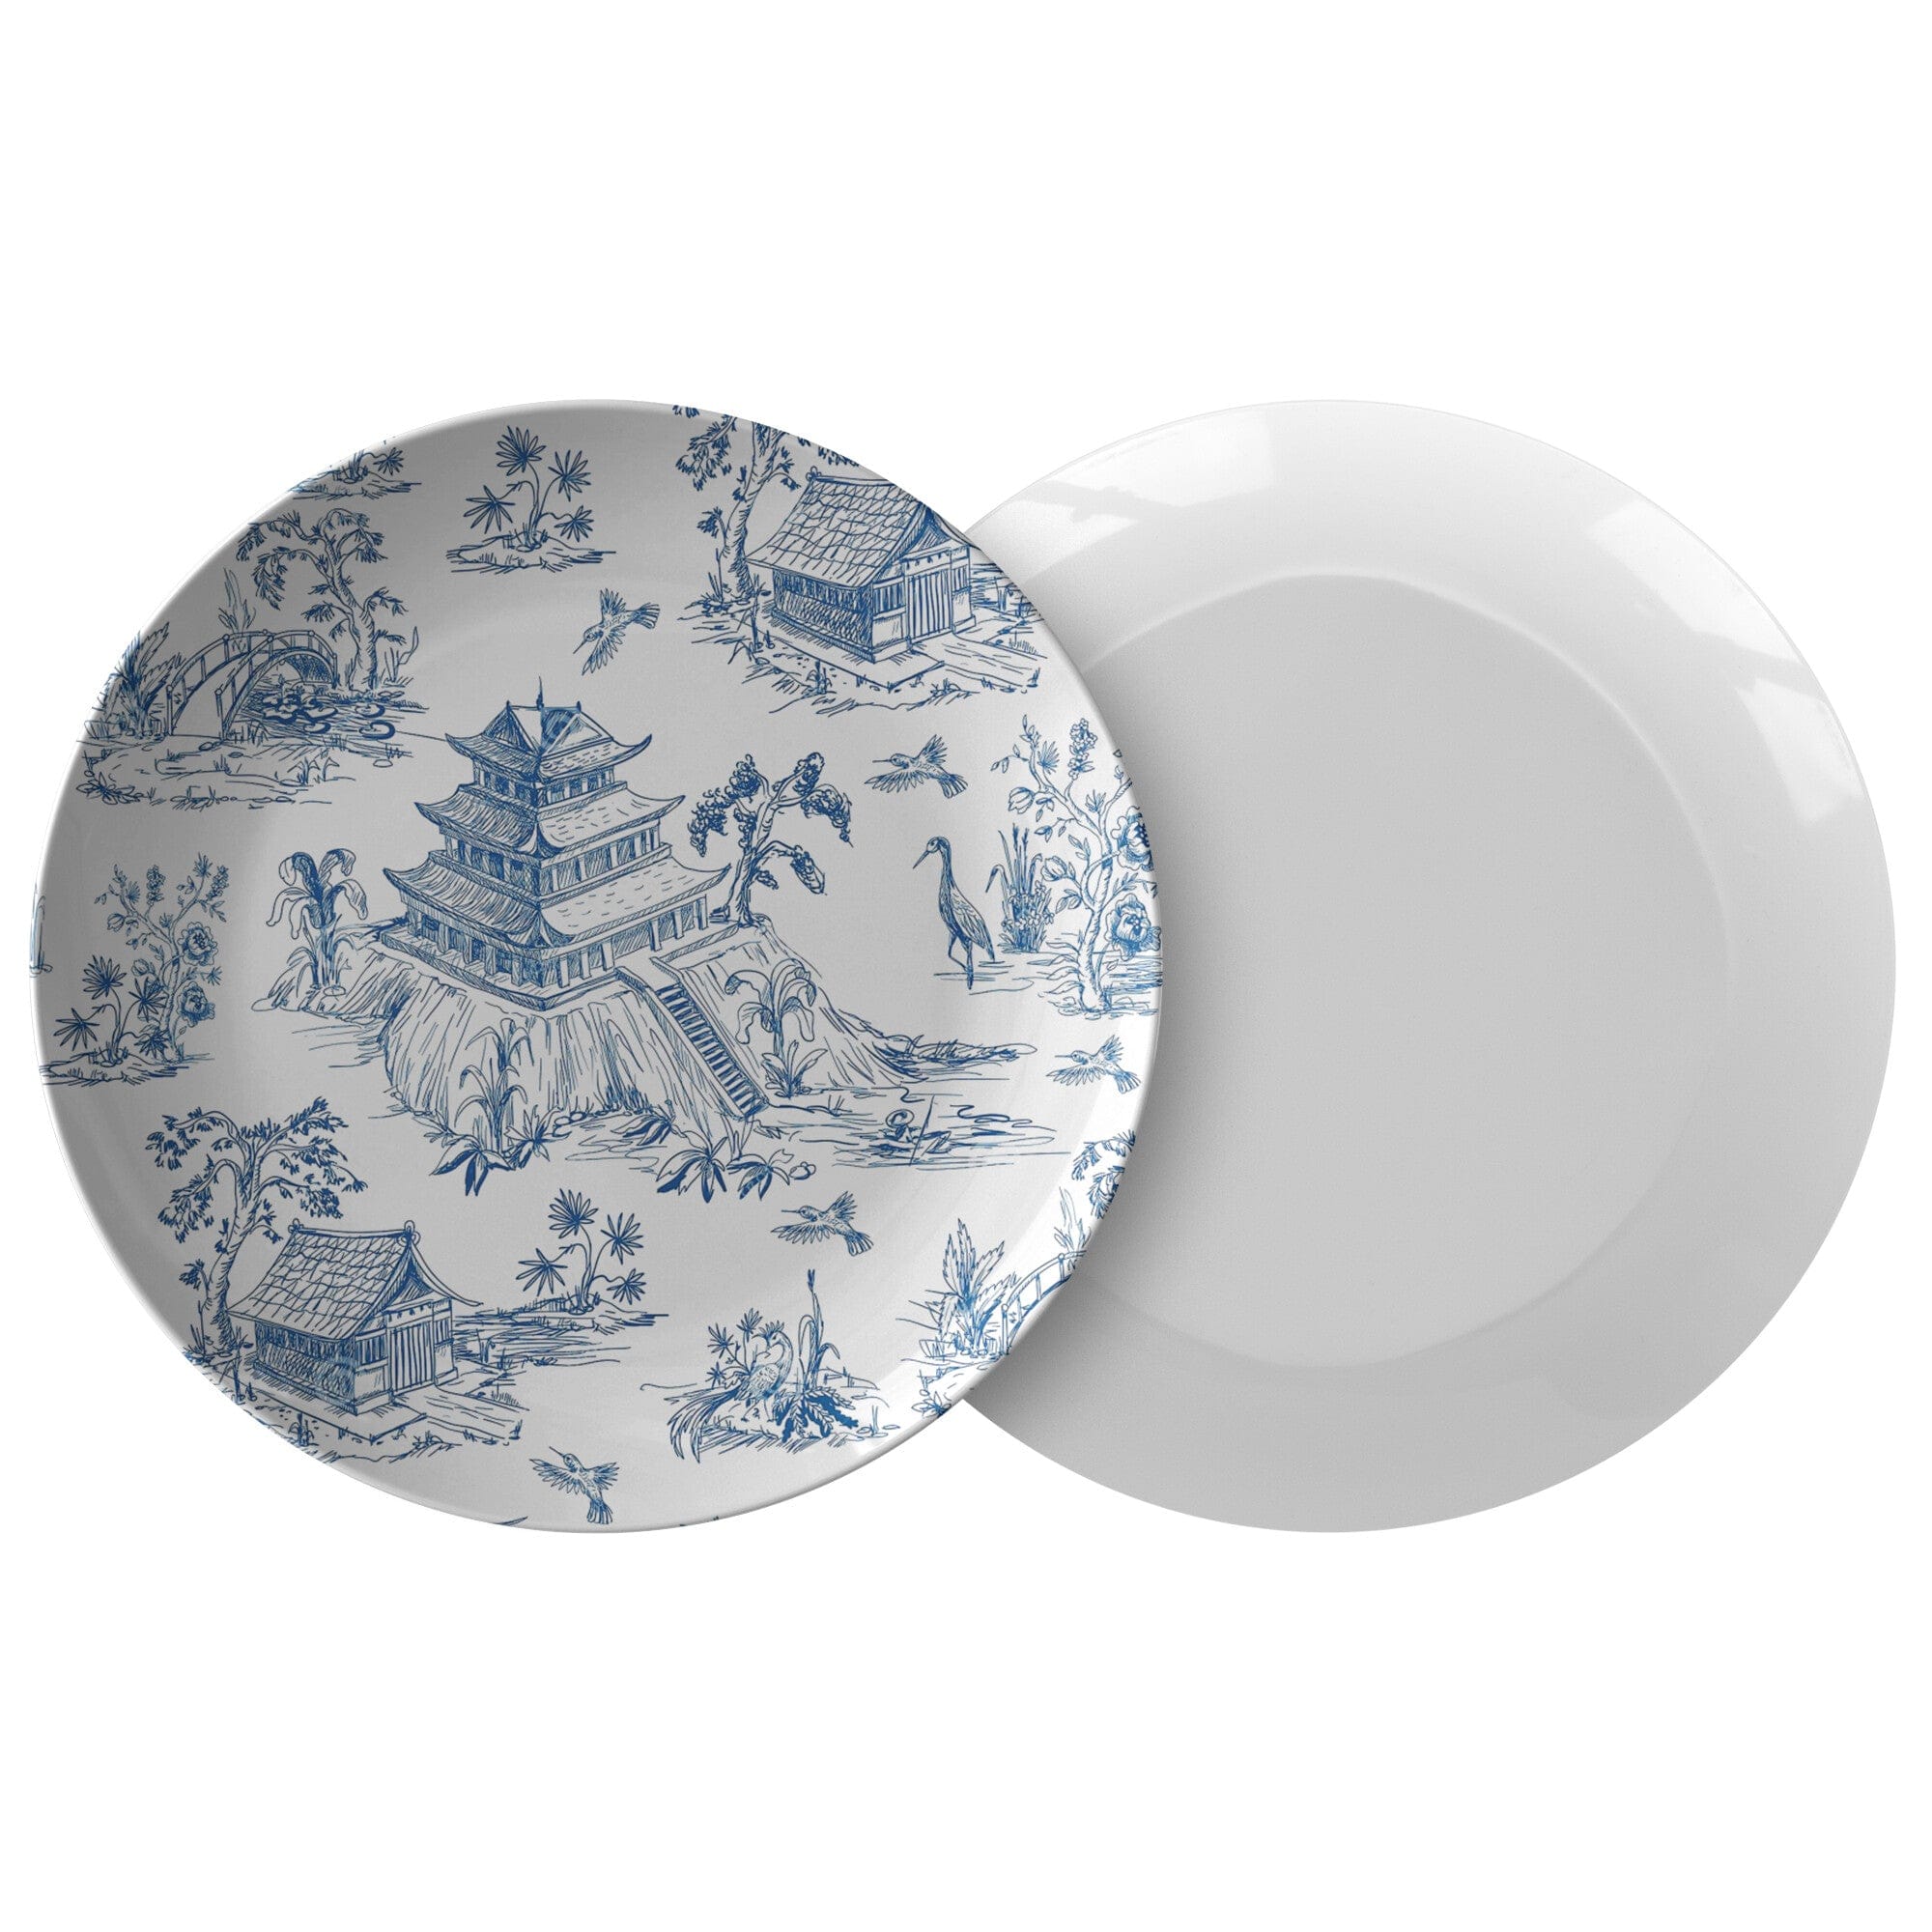 Kate McEnroe New York Chinoiserie Floral Landscape and Temples Dinner Plates Plates Single 9820SINGLE